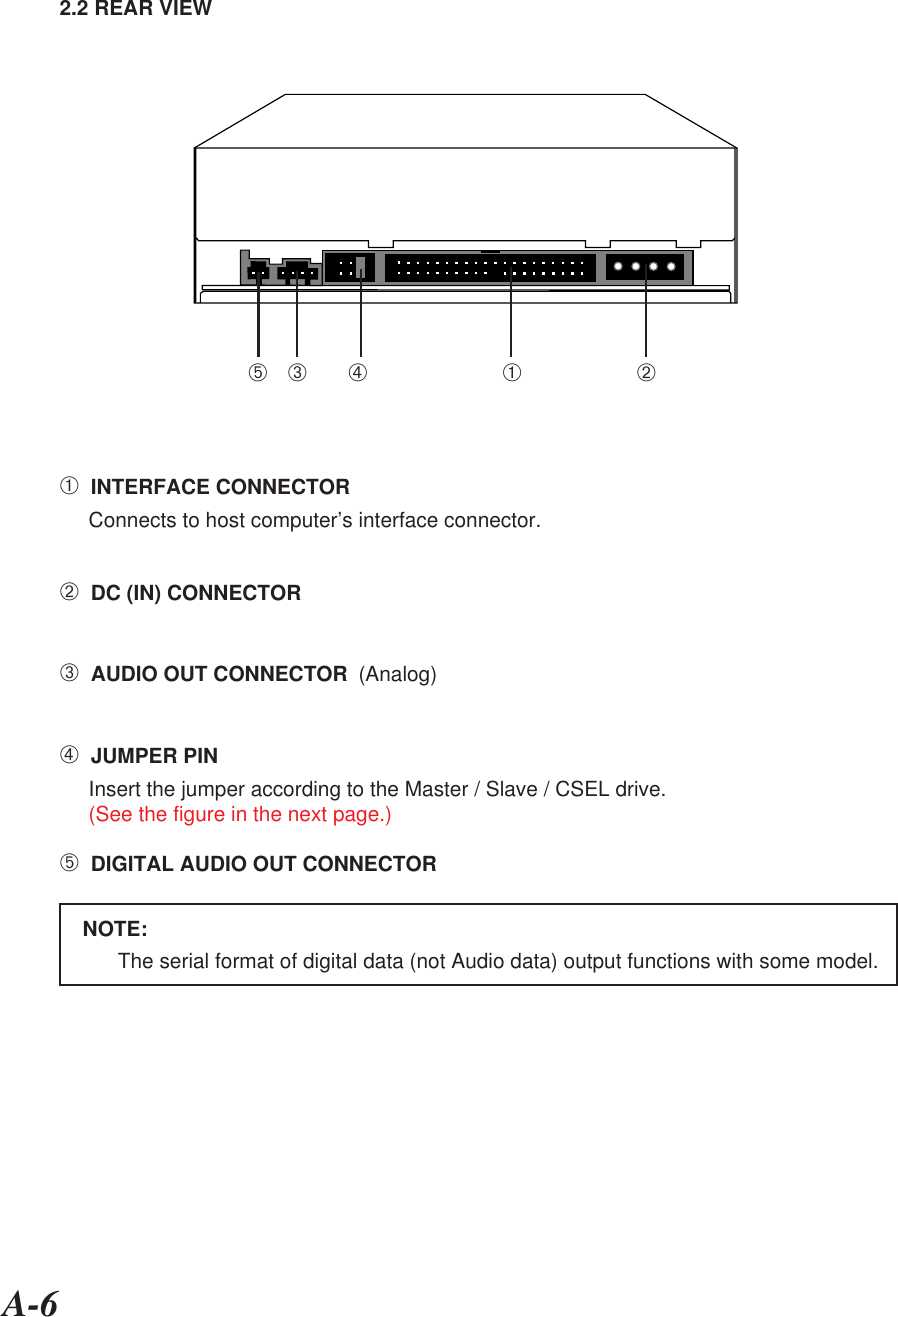 A-62.2 REAR VIEW➀  INTERFACE CONNECTORConnects to host computer’s interface connector.➁  DC (IN) CONNECTOR➂  AUDIO OUT CONNECTOR  (Analog)➃  JUMPER PINInsert the jumper according to the Master / Slave / CSEL drive.(See the figure in the next page.)➄  DIGITAL AUDIO OUT CONNECTOR➀➁➂➃➄    NOTE:The serial format of digital data (not Audio data) output functions with some model.